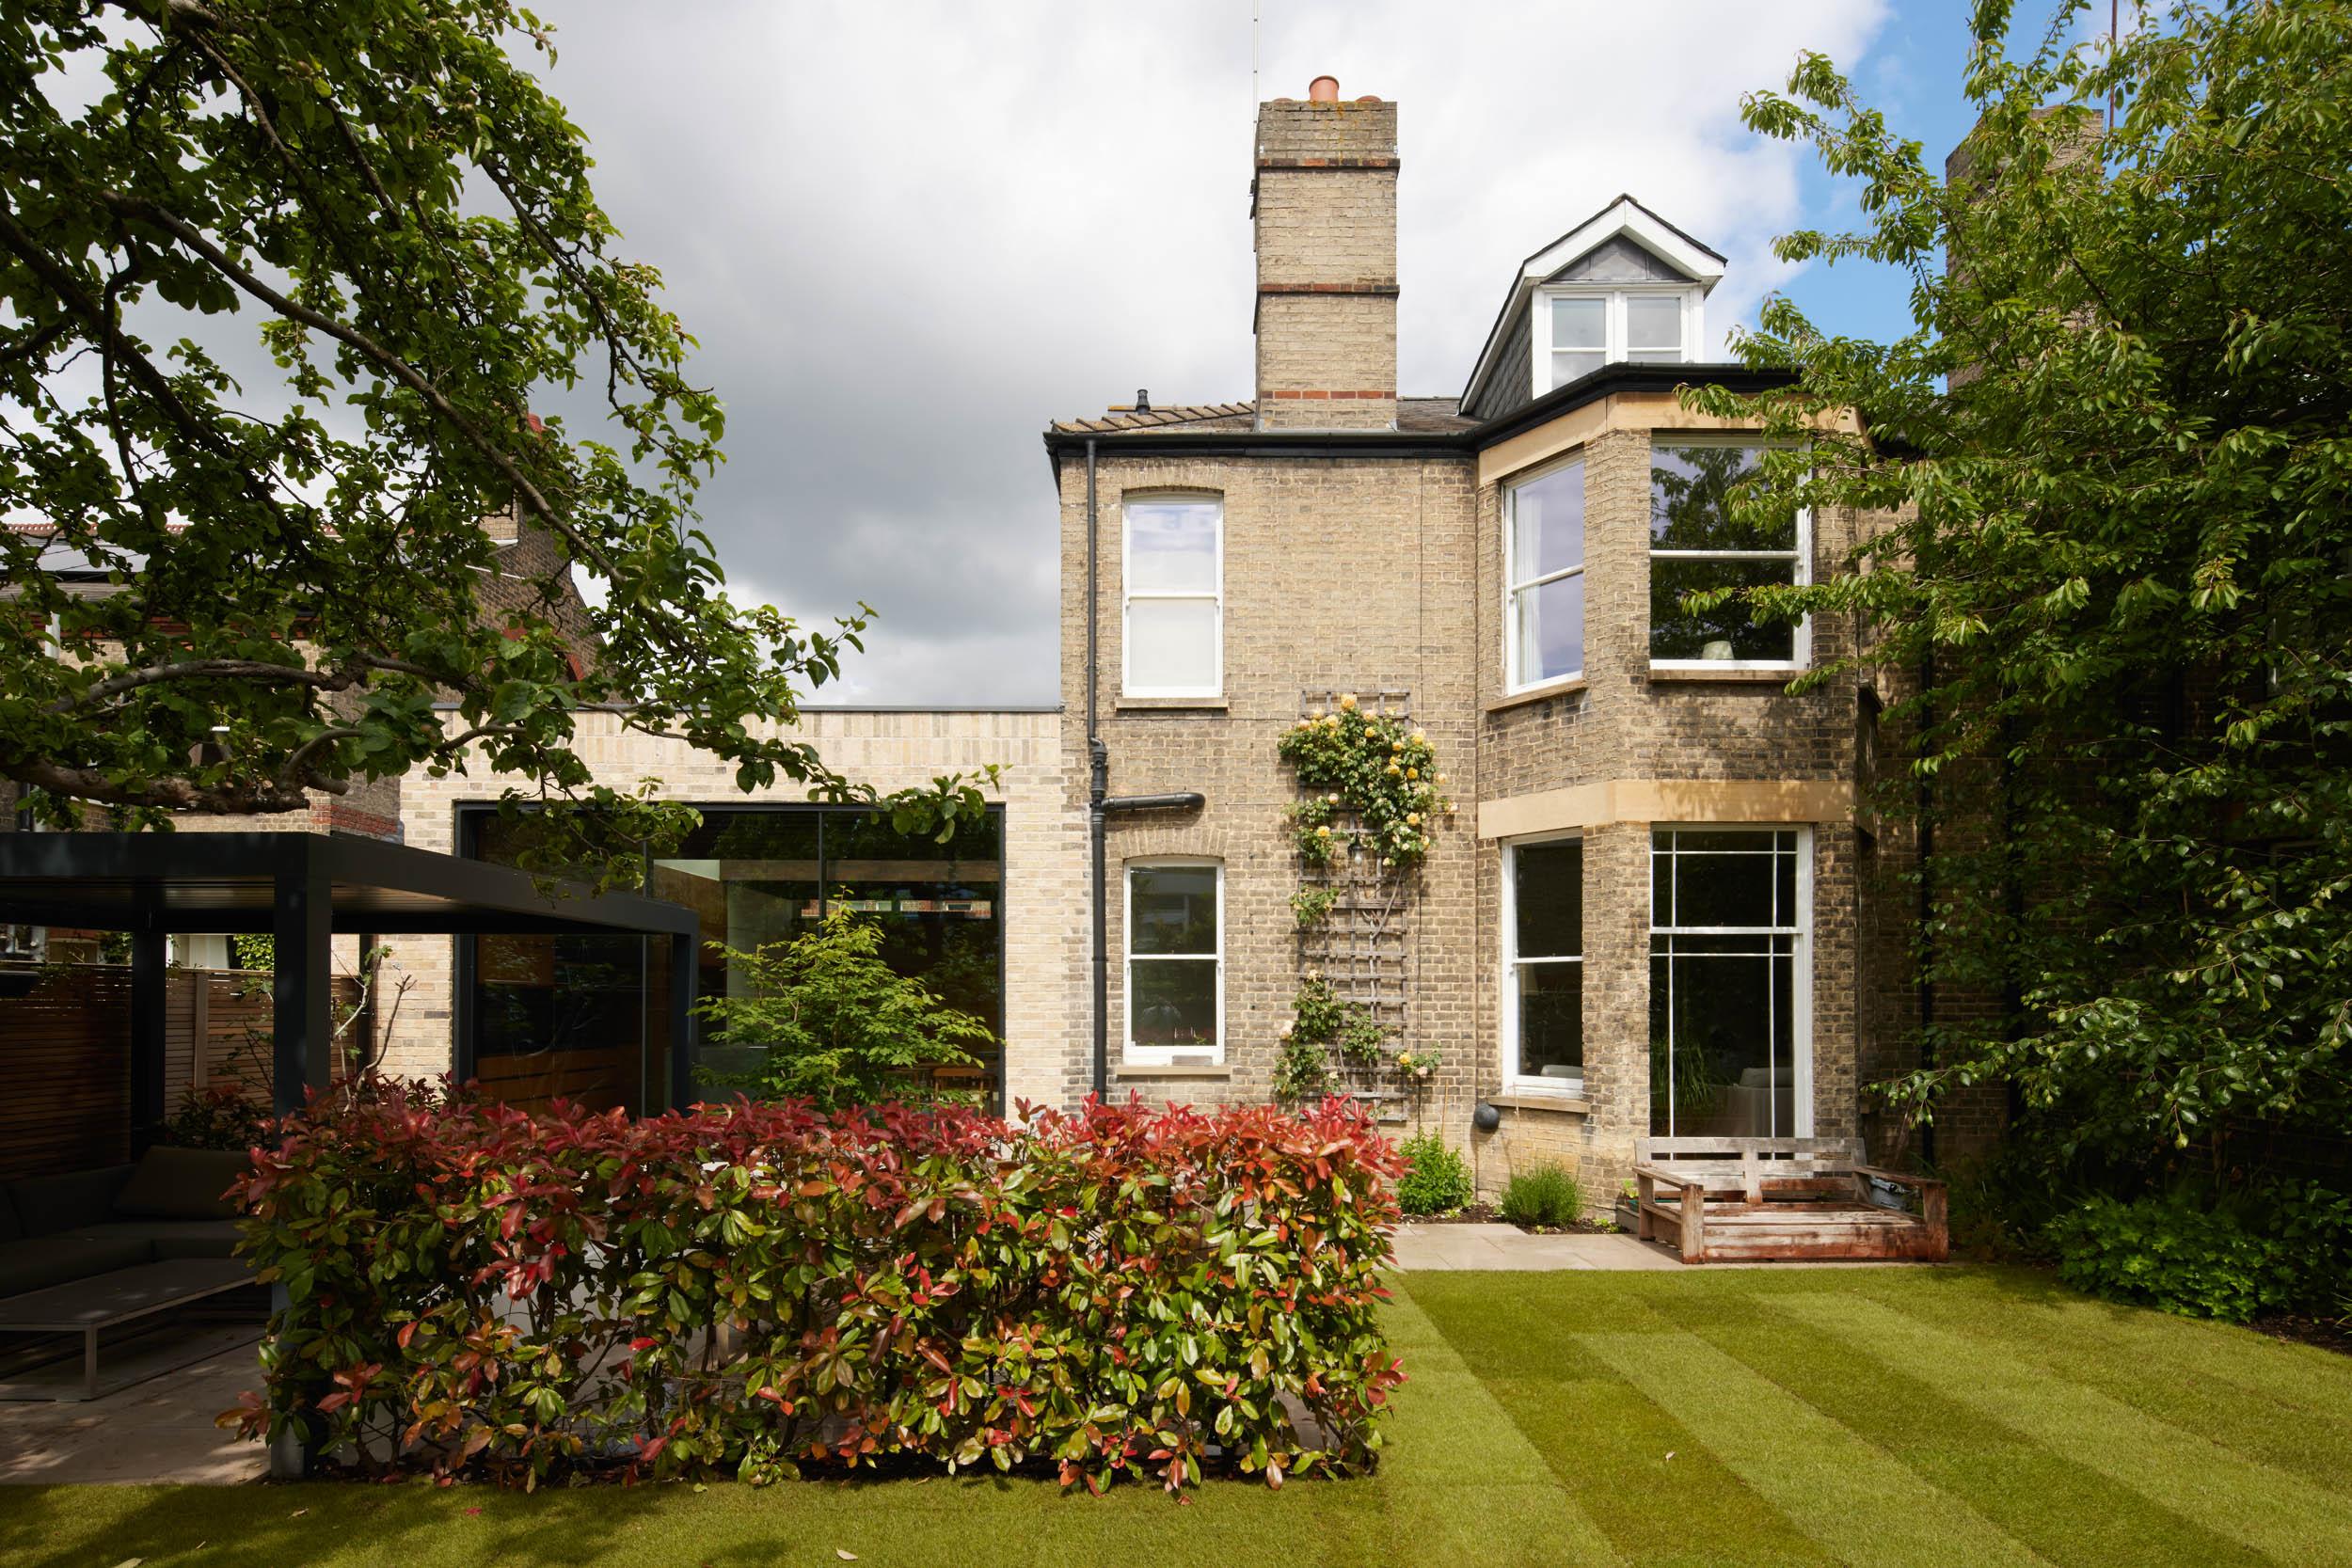 Contemporary extension in conservation area | cdc studio cambridge architects